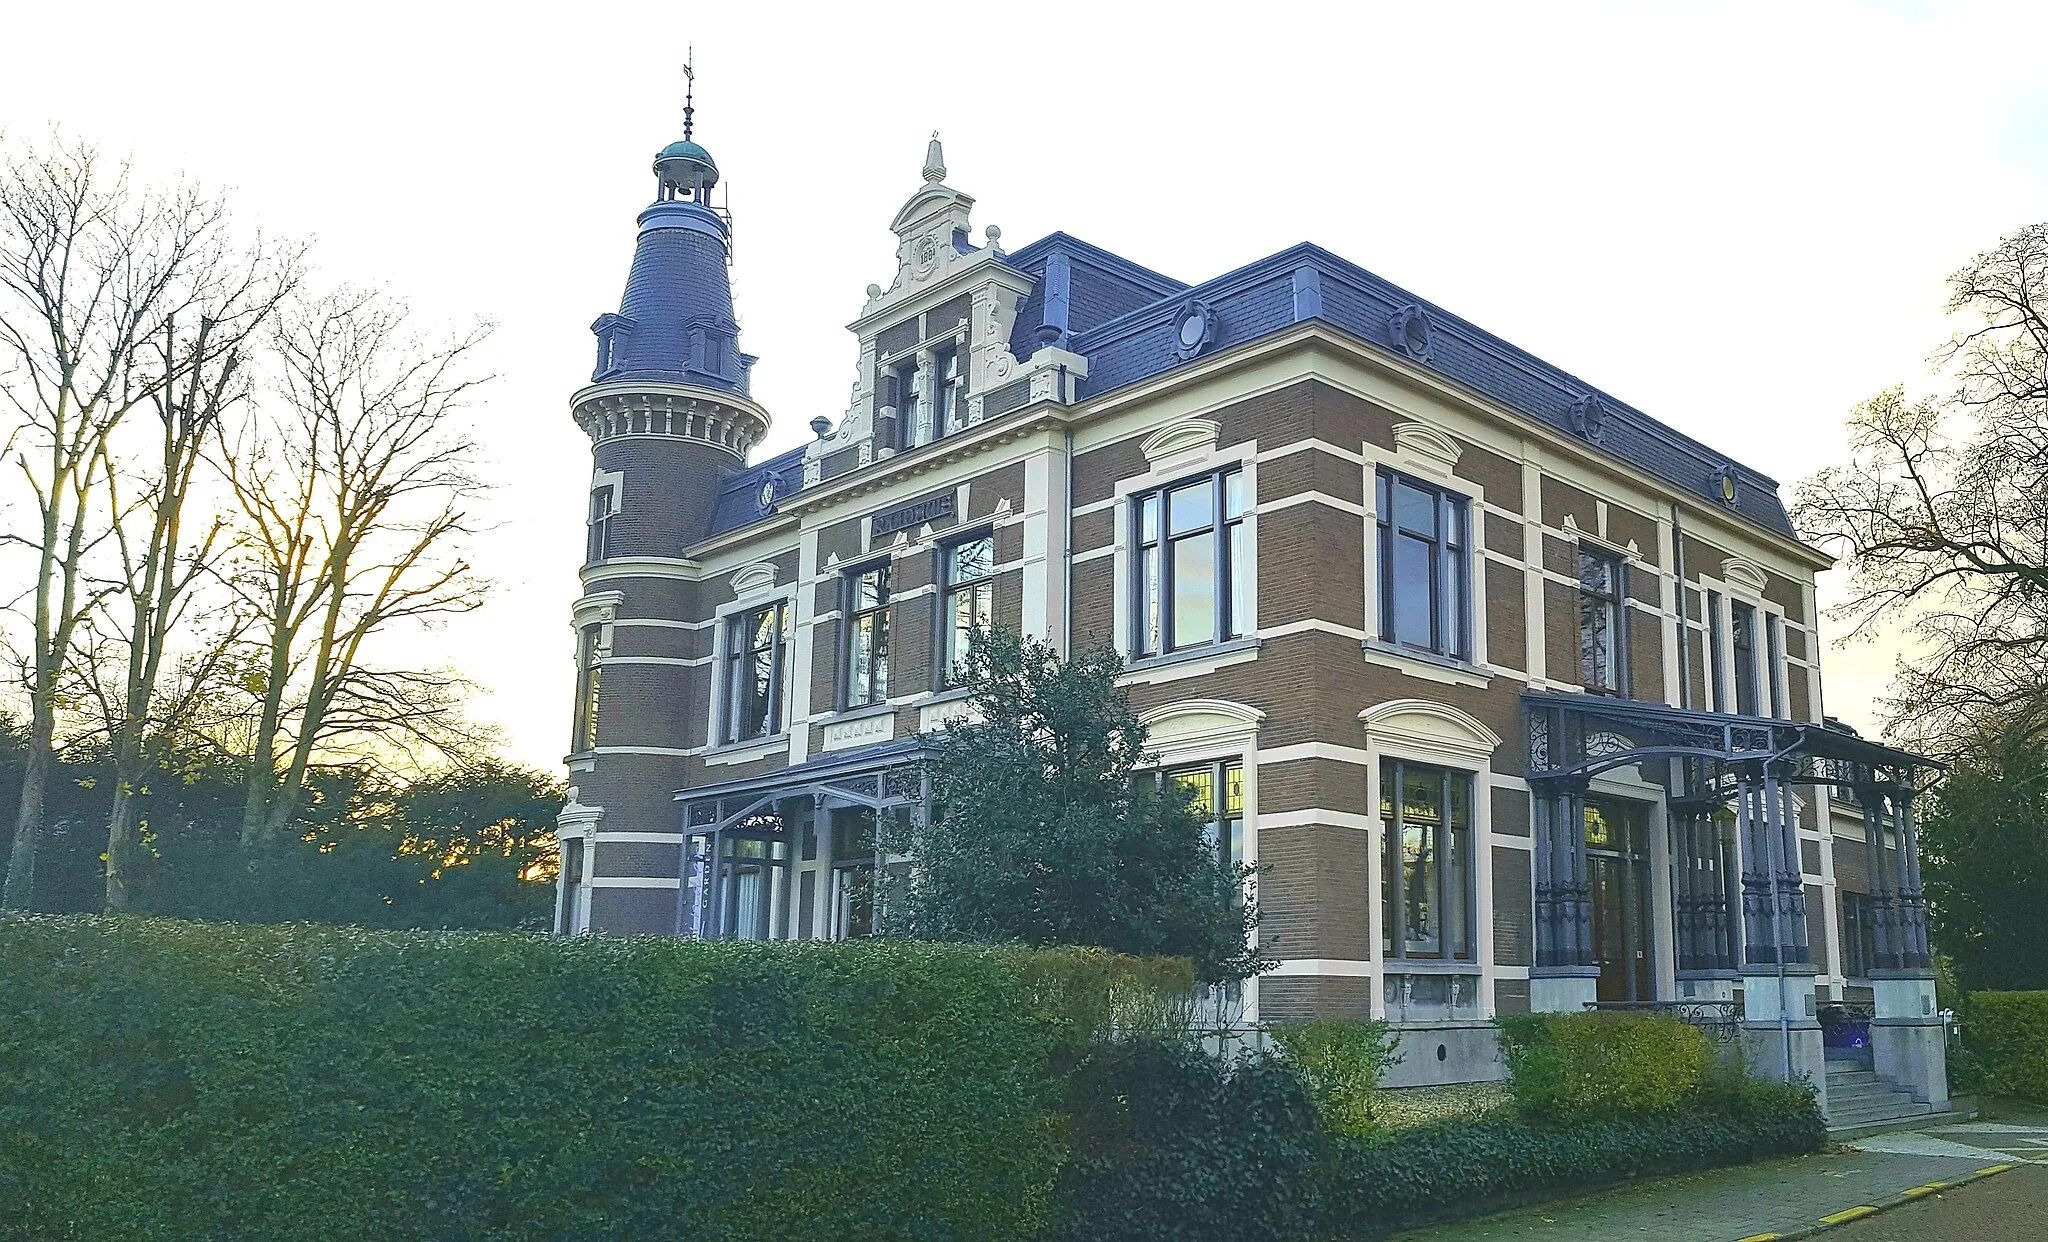 Photo showing: The last town hall of Hillegersberg, prior to its annexation by Rotterdam in 1941, was the Buitenlust villa on the C.N.A. Looslaan 1. This villa was built in 1884 in the style of the neo-Renaissance by architect J.J. van Waning (1830-1917) and was commissioned by the De Kat family.